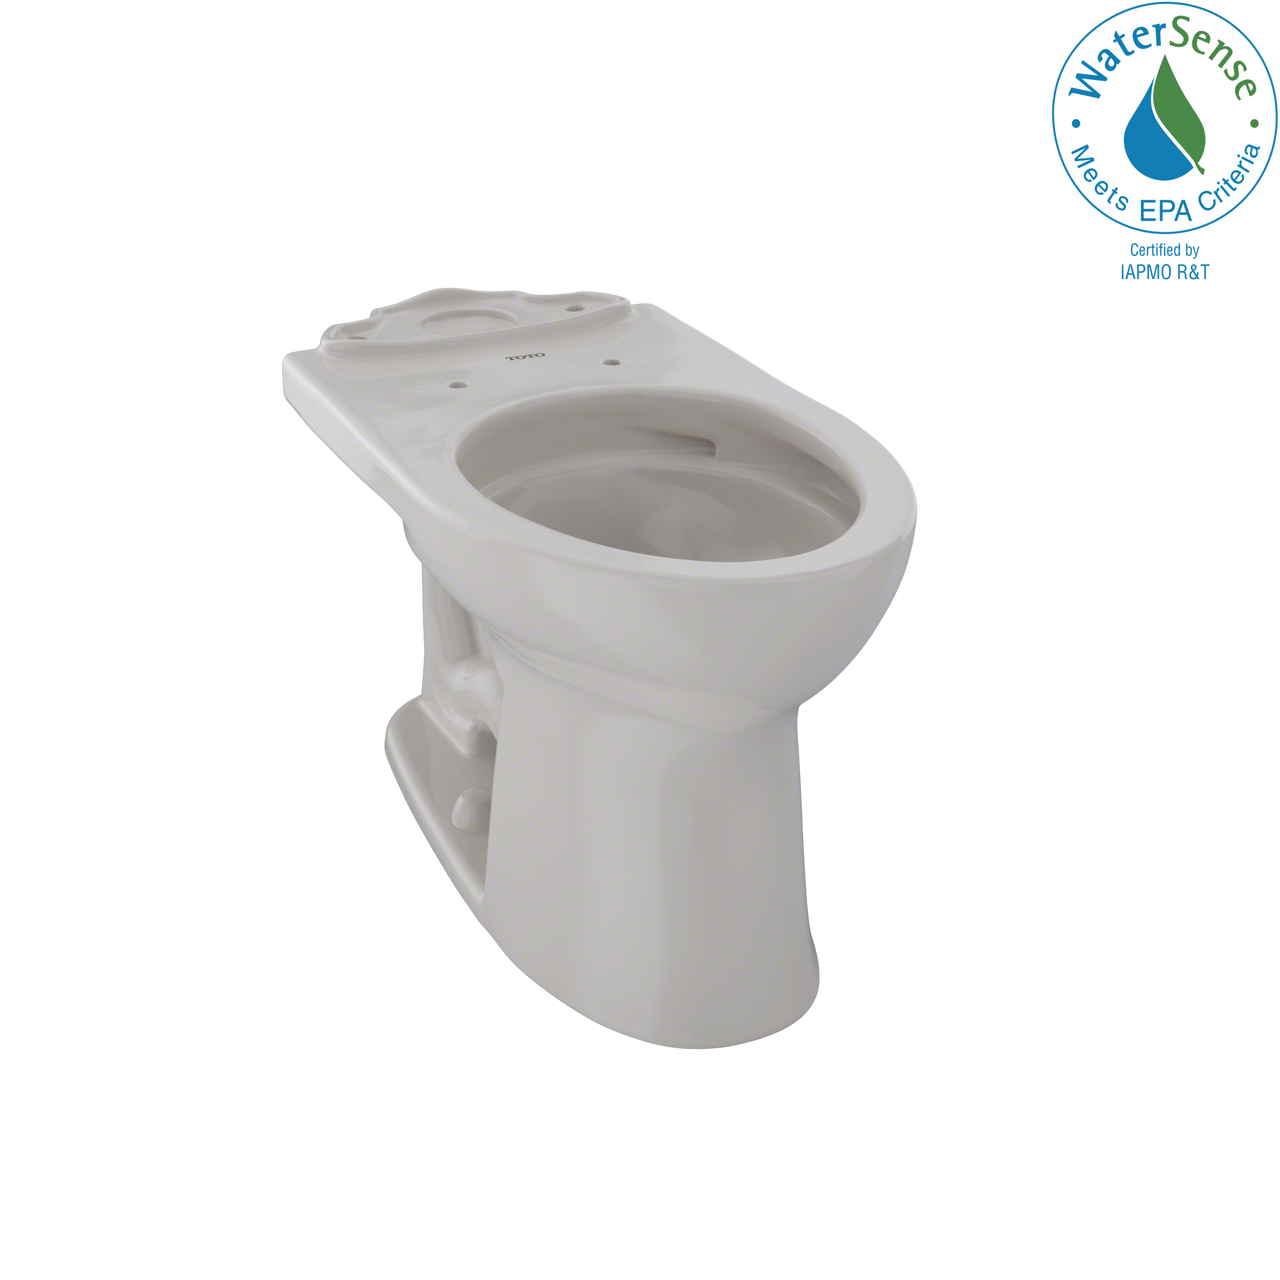 TOTO Drake II Universal Height Elongated Toilet Bowl with CeFiONtect,  - C454CUFG#12 - BNGBath